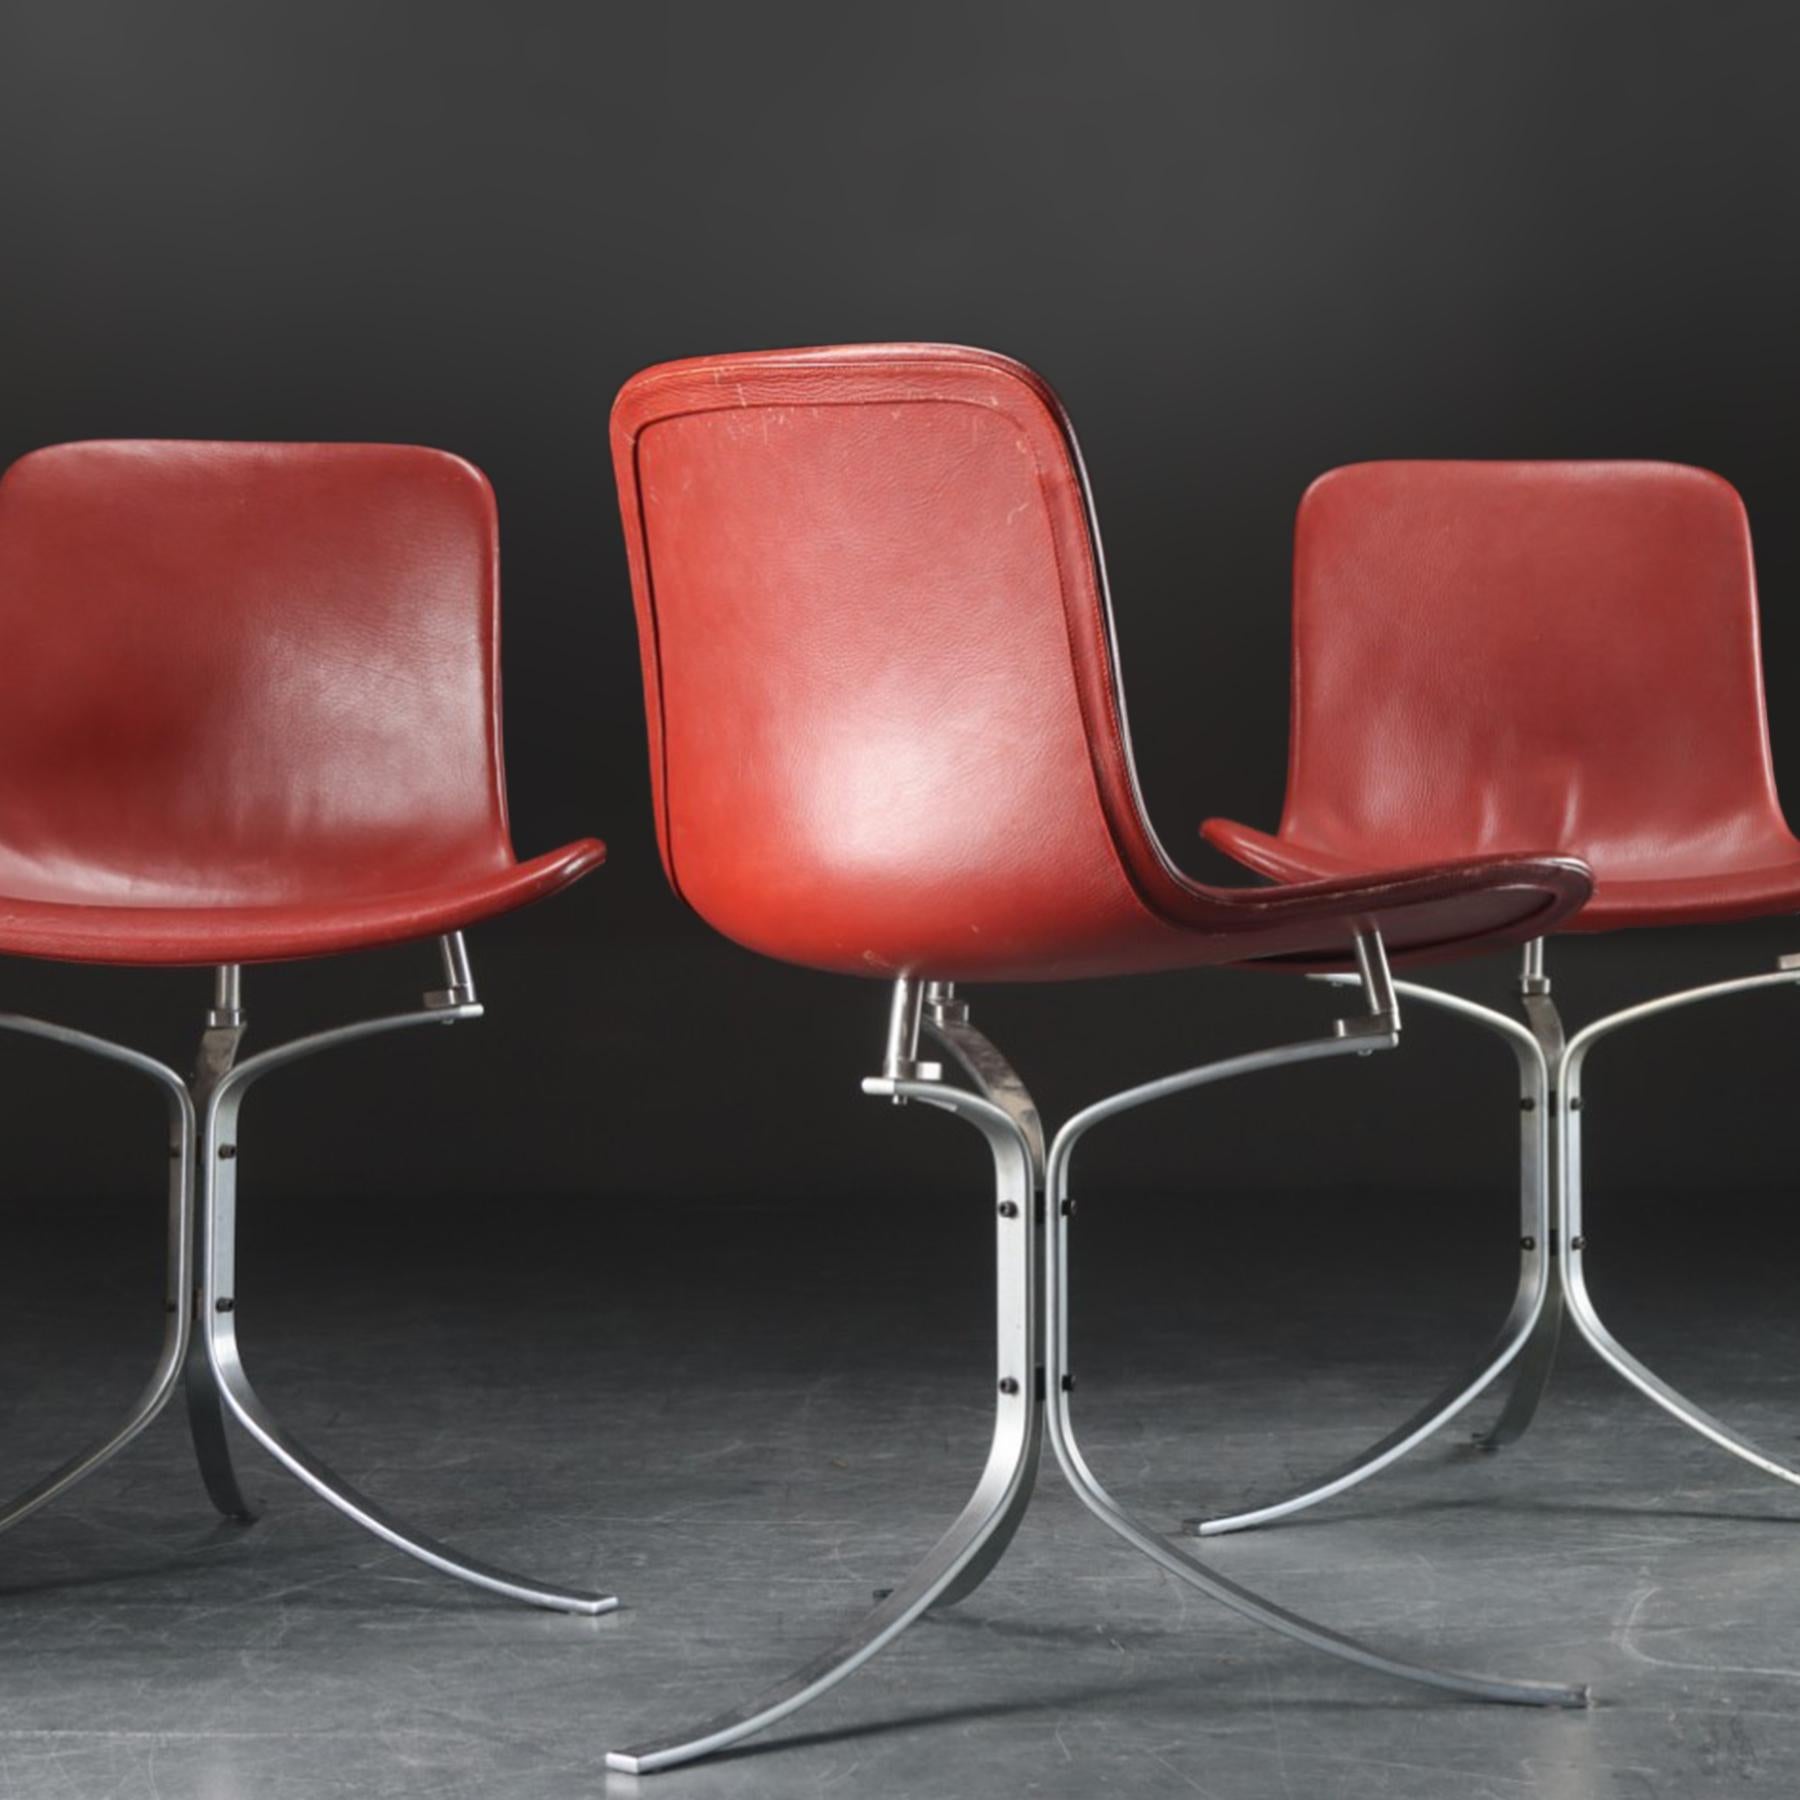 20th Century 4 Poul Kjaerholm PK9 E. Kold Christensen chairs with seat height extensions For Sale